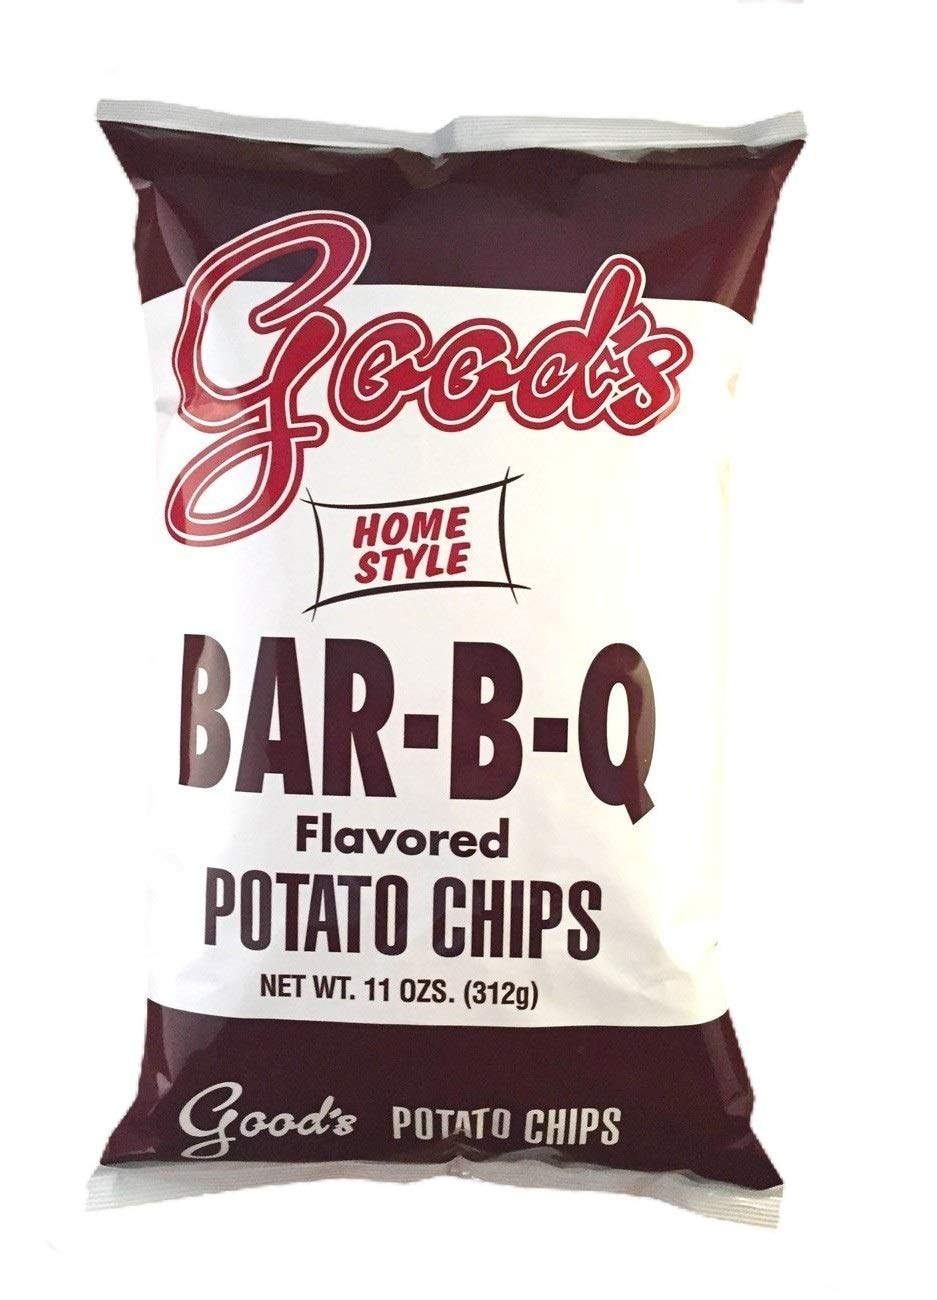 Primary image for Good's Homestyle Bar-B-Q Flavored Potato Chips, 11 Oz. Bags